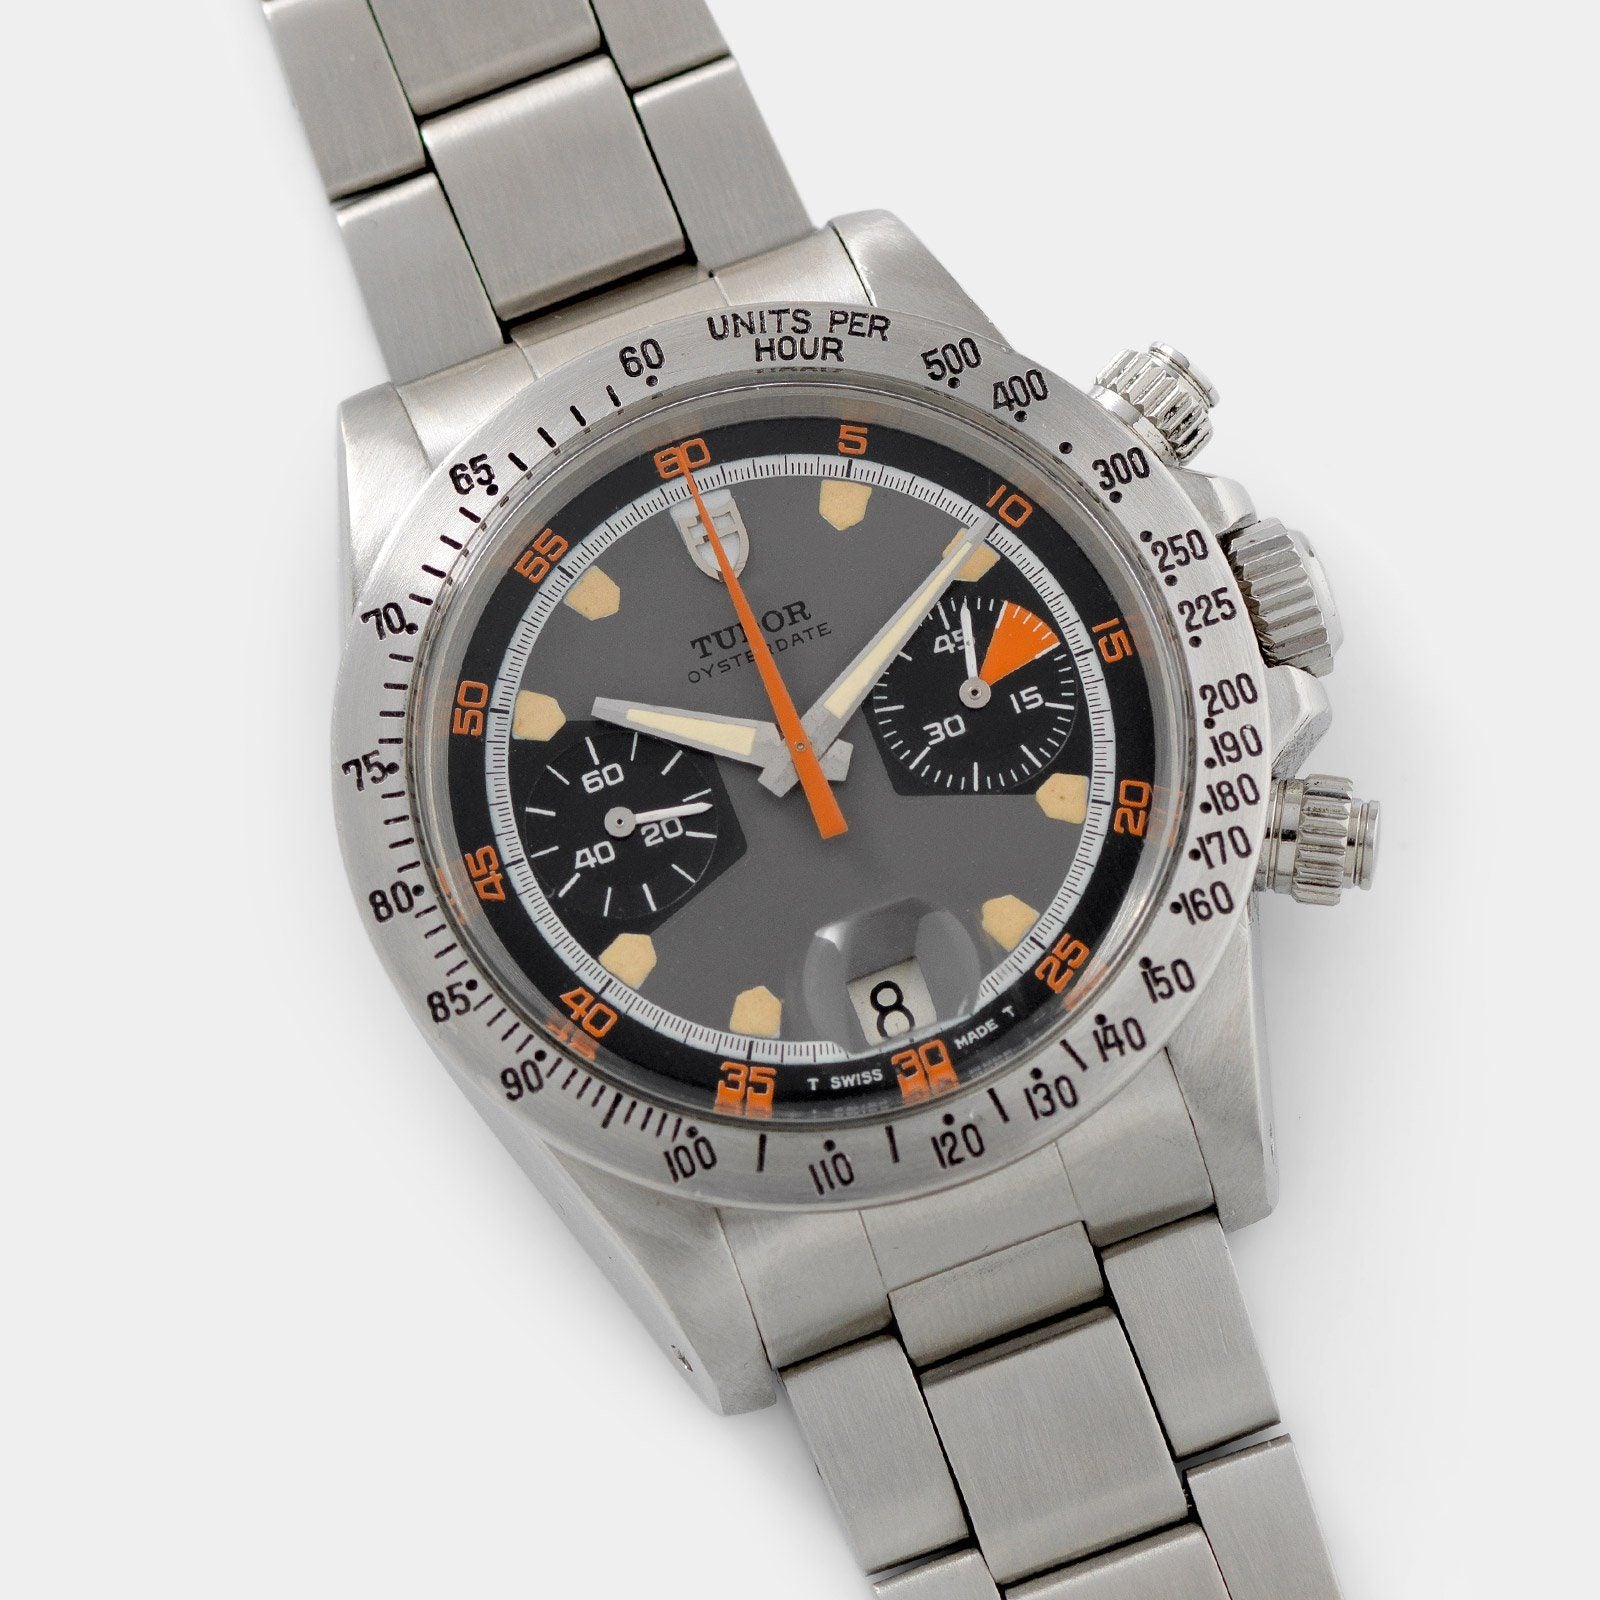 Tudor Home Plate Chronograph Reference 7032 with brushed-steel tachymeter bezel